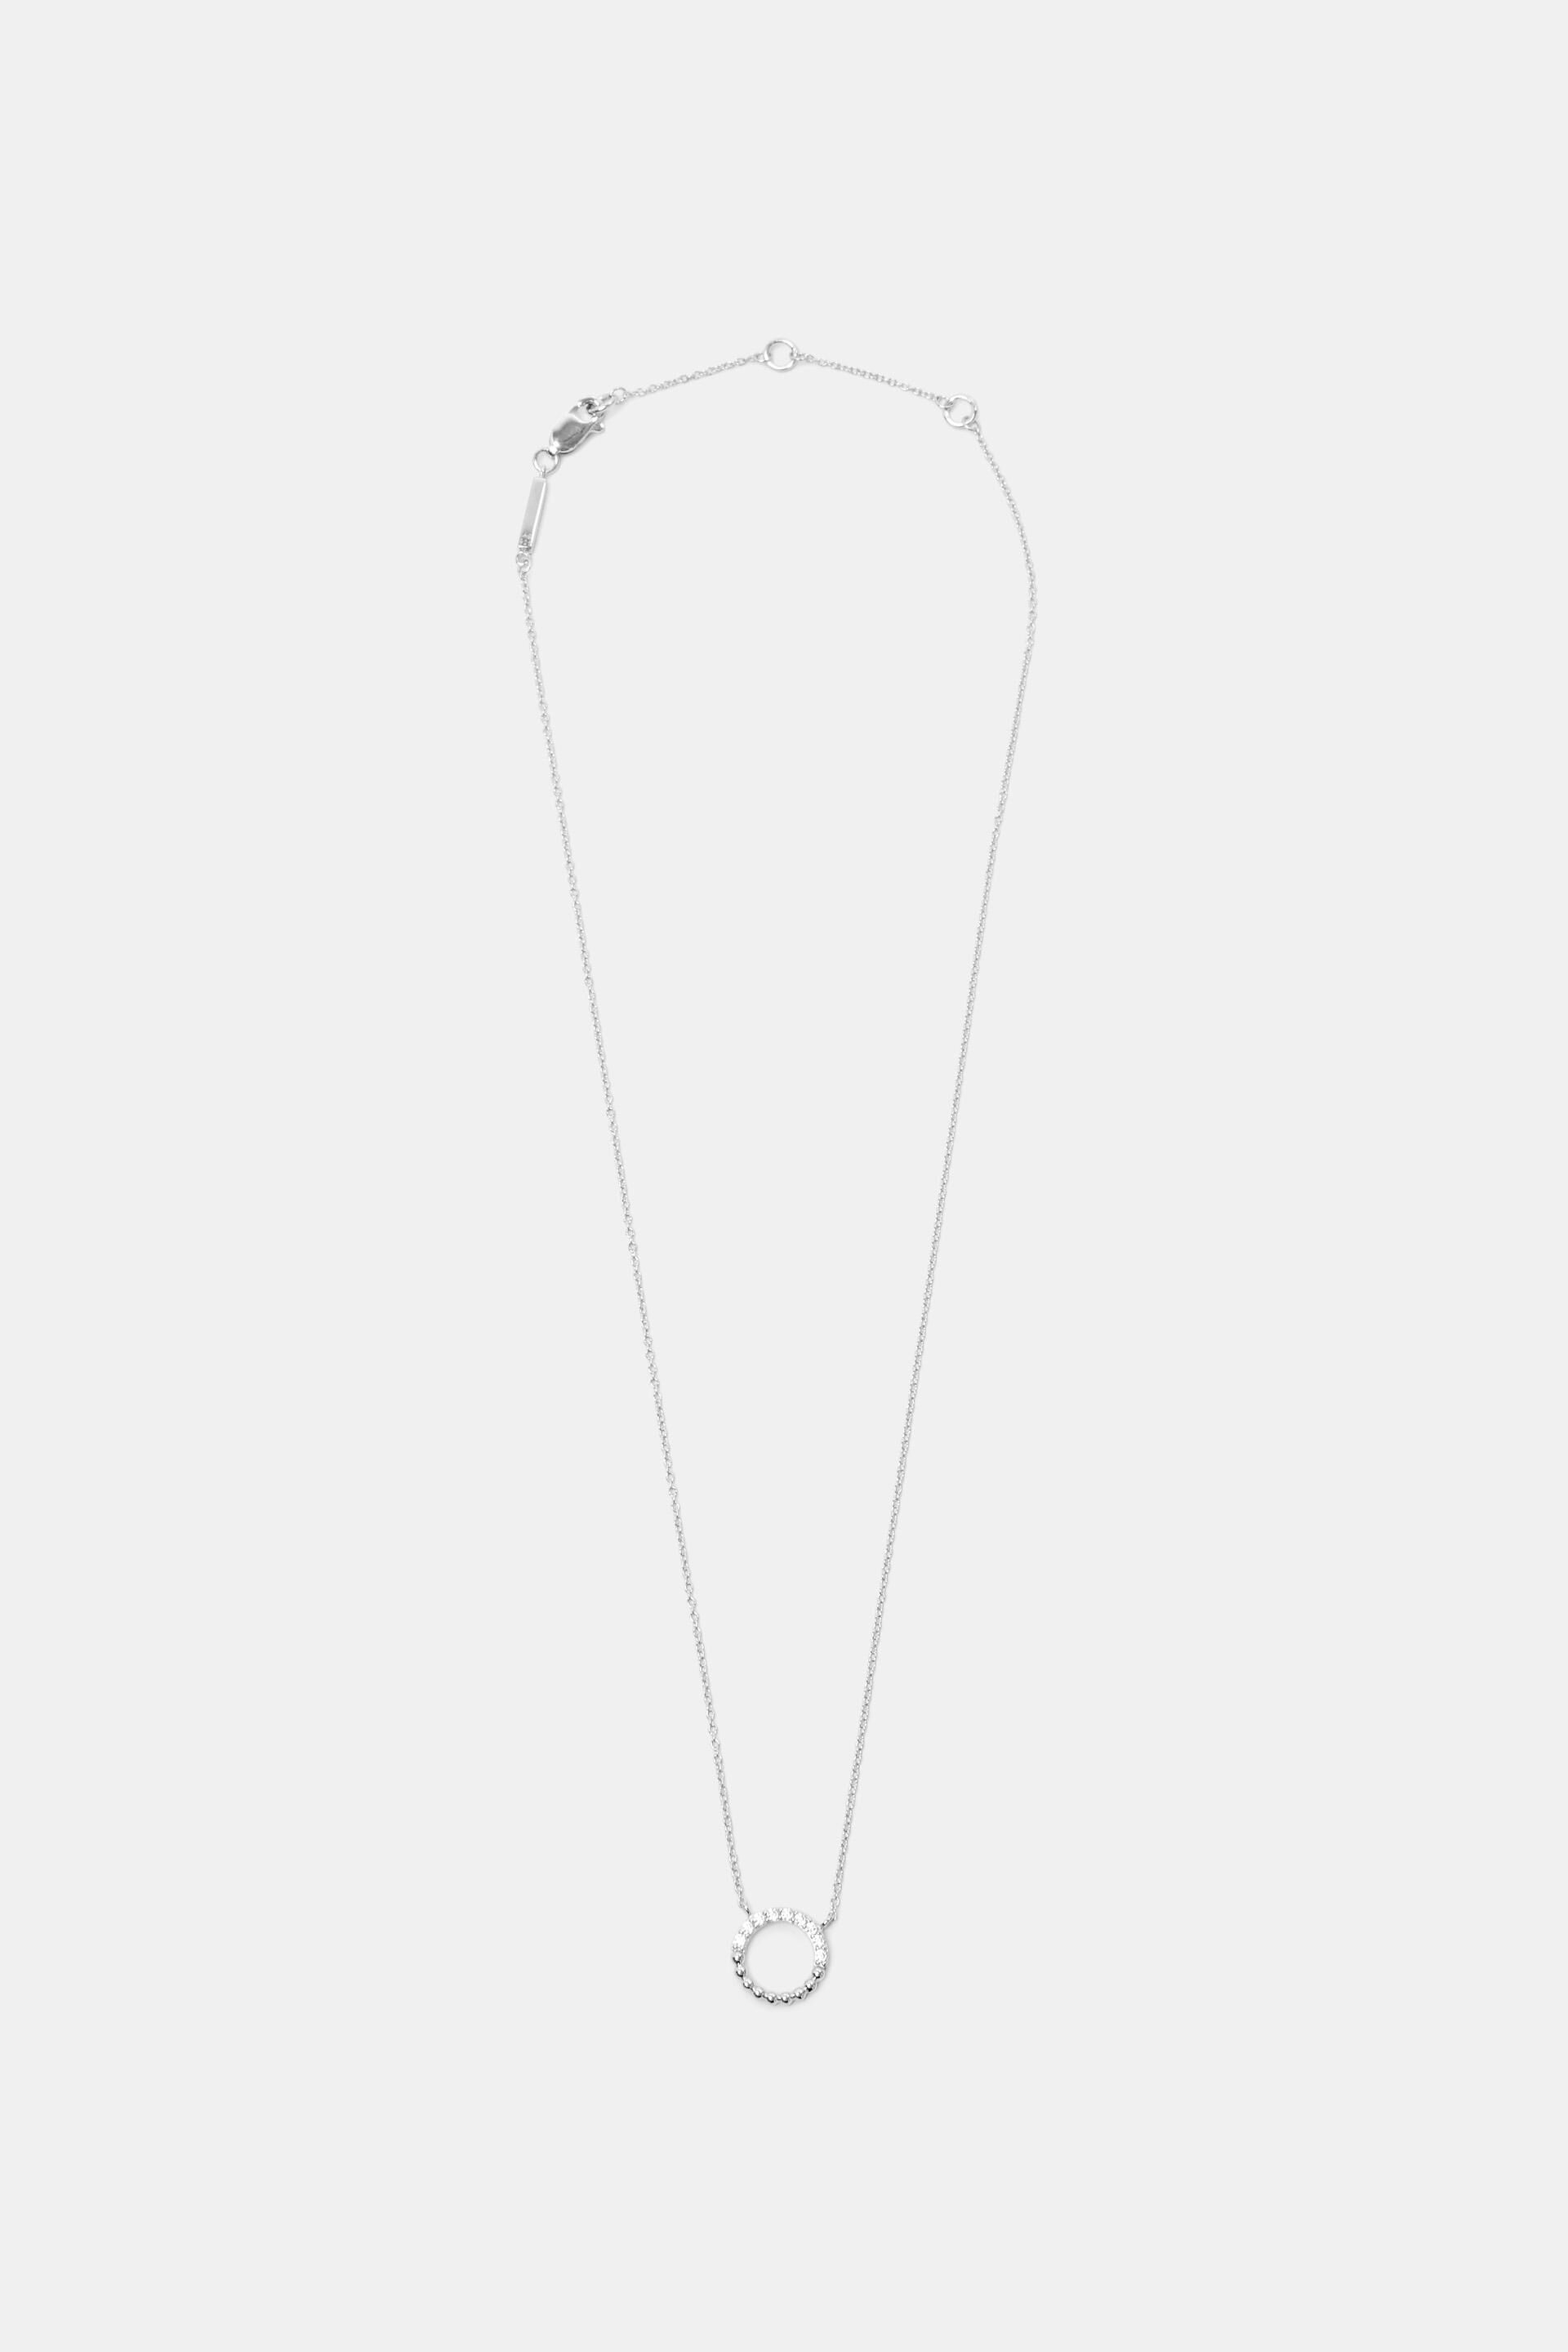 Esprit Online Store Necklace with orb pendant, sterling silver